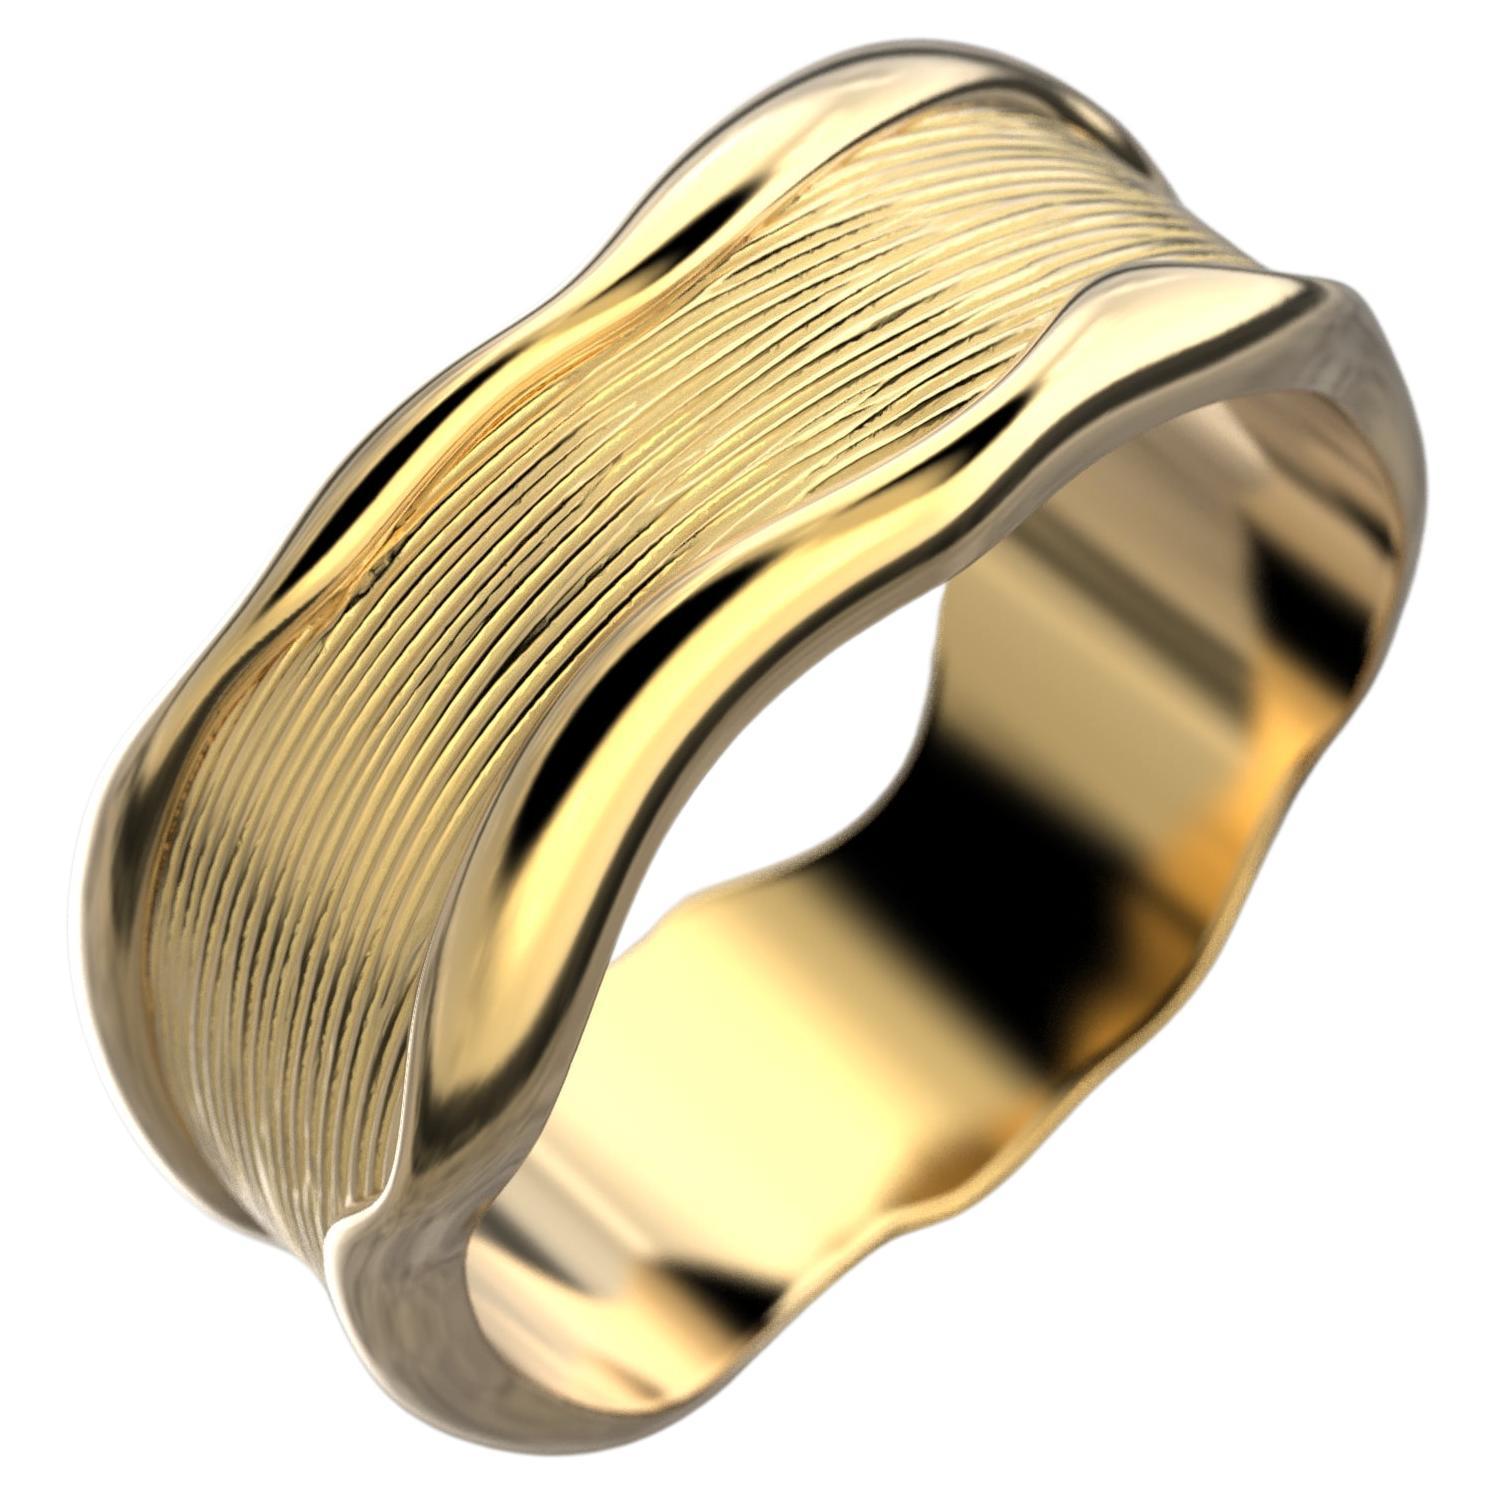 For Sale:  Hand-Engraved Unisex 18k Gold Band Ring Made in Italy by Oltremare Gioielli